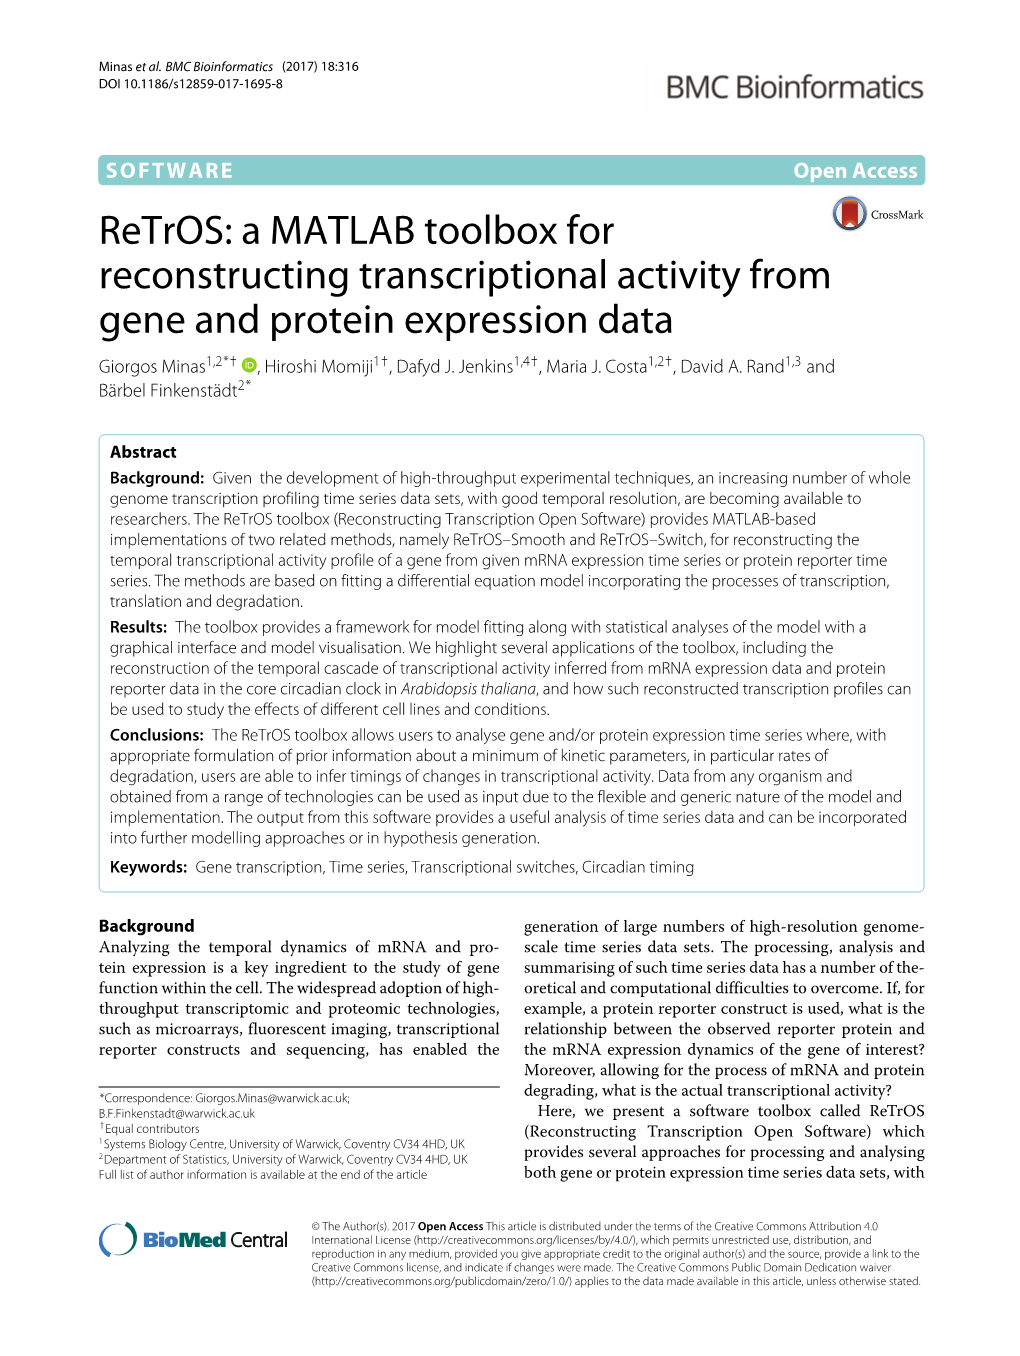 A MATLAB Toolbox for Reconstructing Transcriptional Activity from Gene and Protein Expression Data Giorgos Minas1,2*† ,Hiroshimomiji1†, Dafyd J